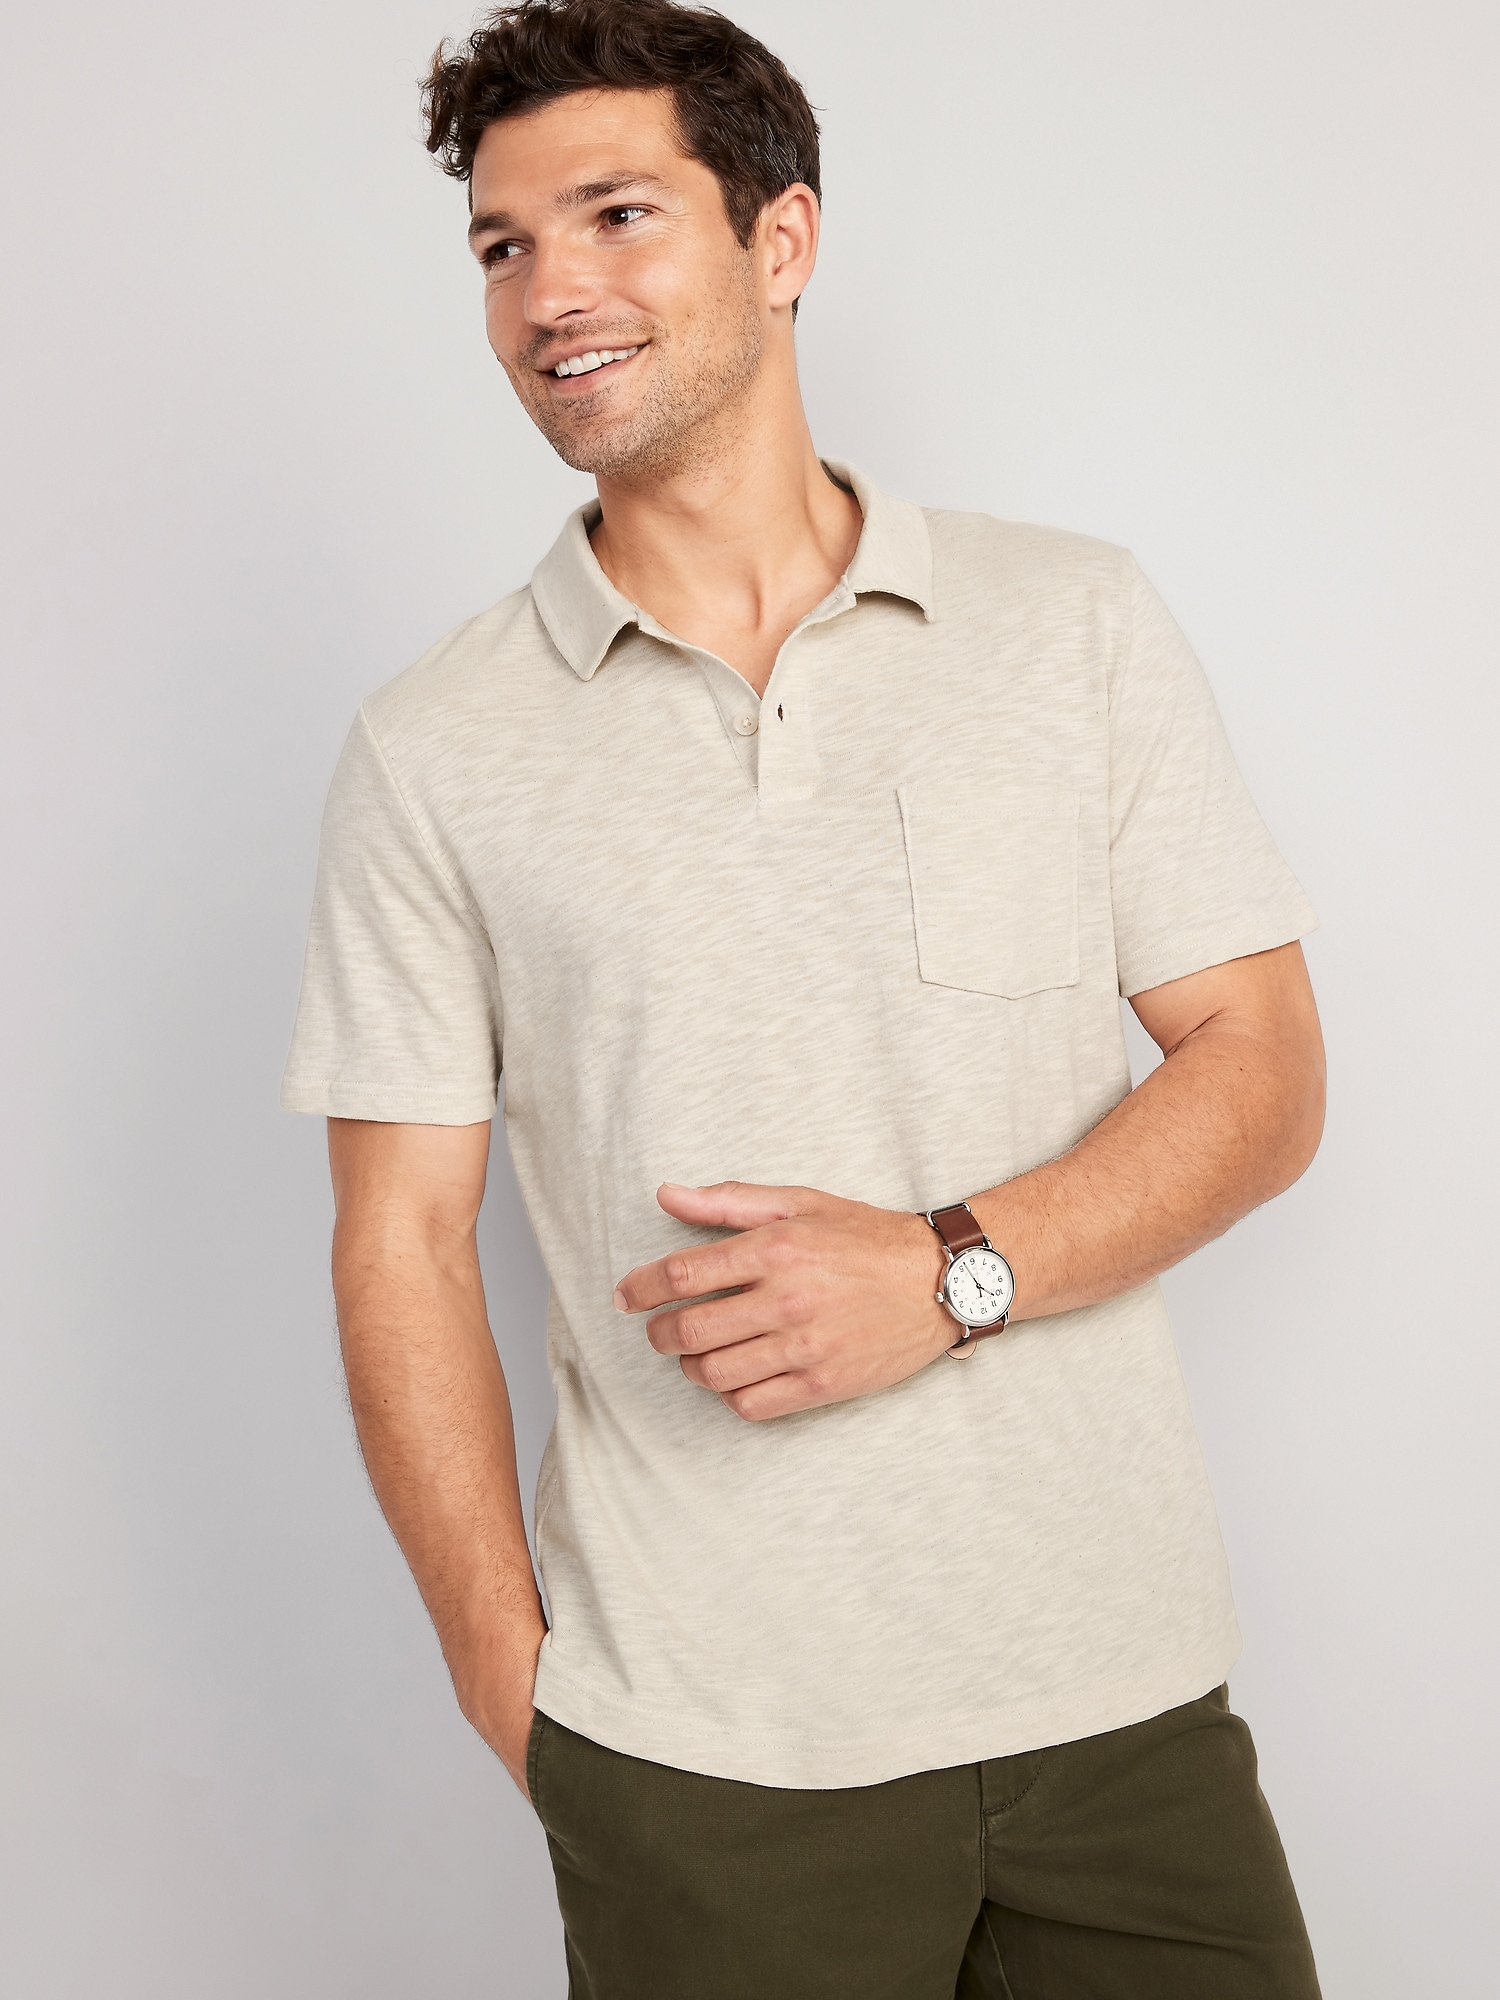 Old Navy Classic Fit Linen-Blend Polo for Men beige. 1